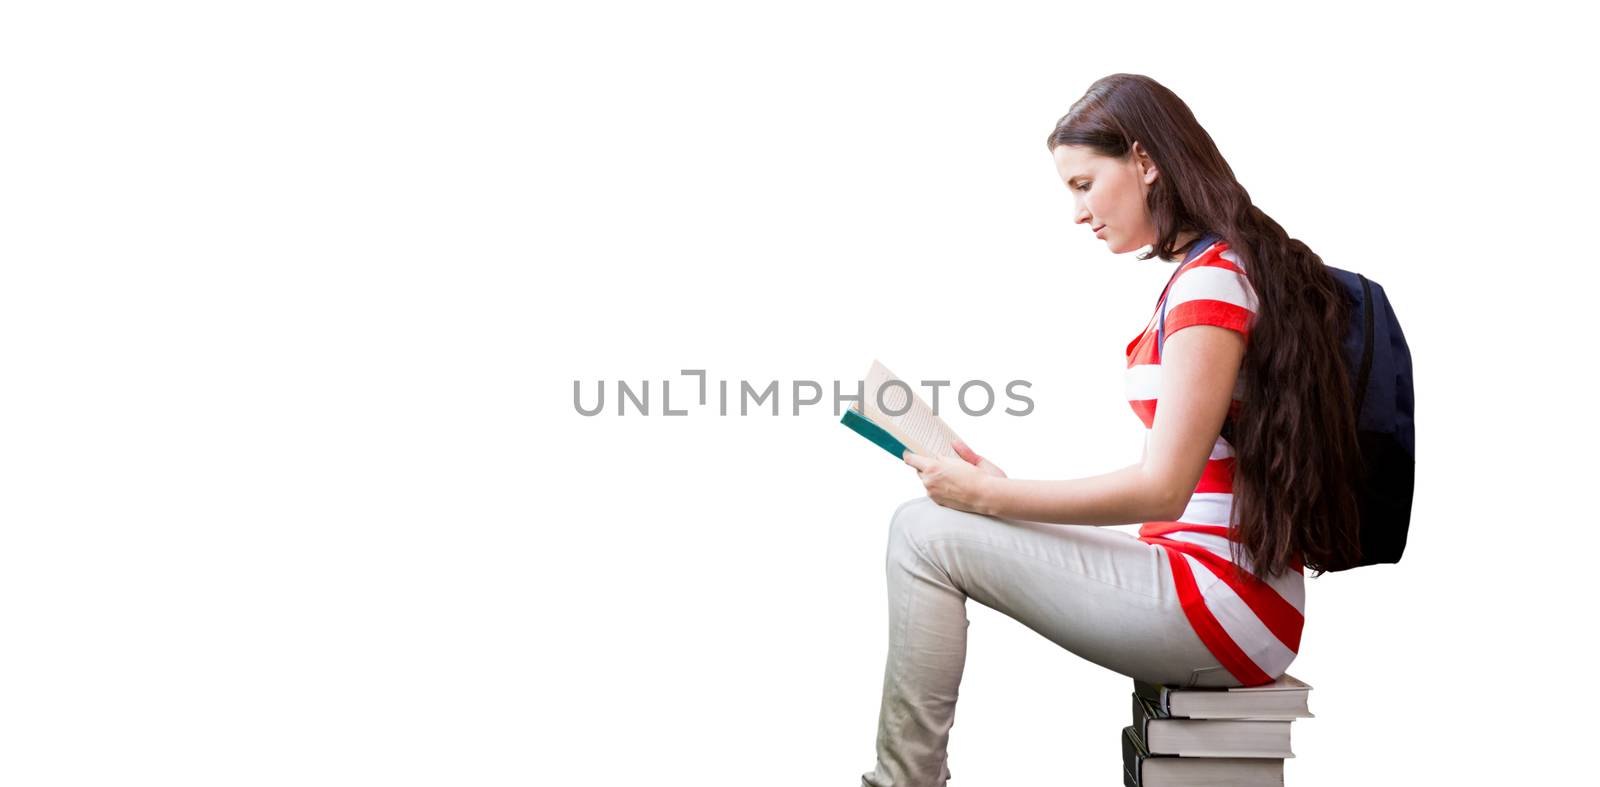 Student reading book in library against white background with vignette